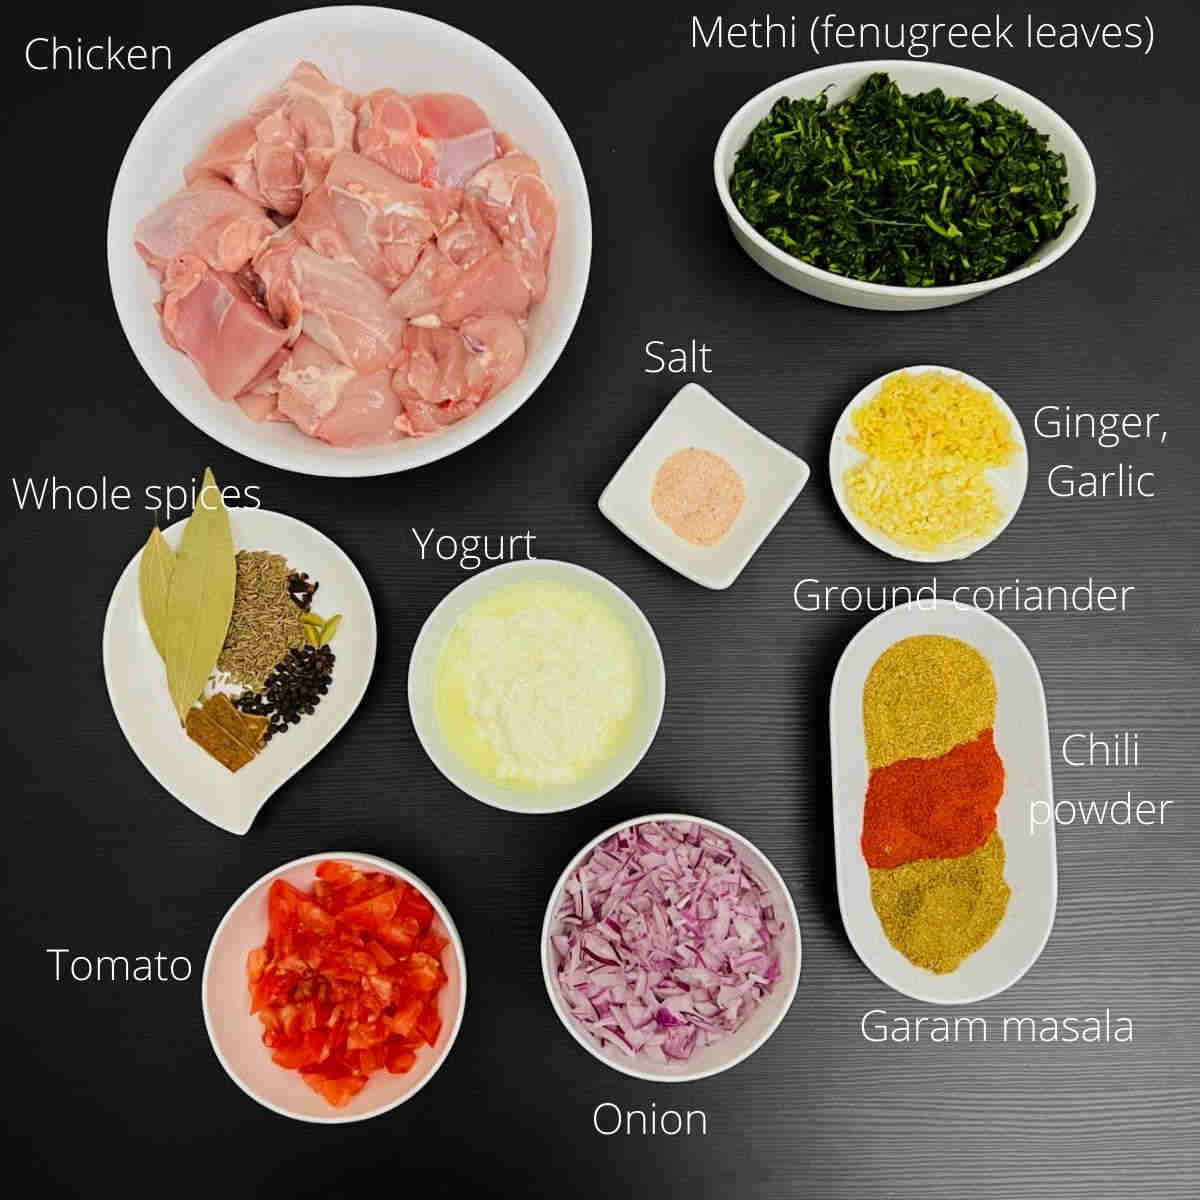 methi chicken ingredients with labels.